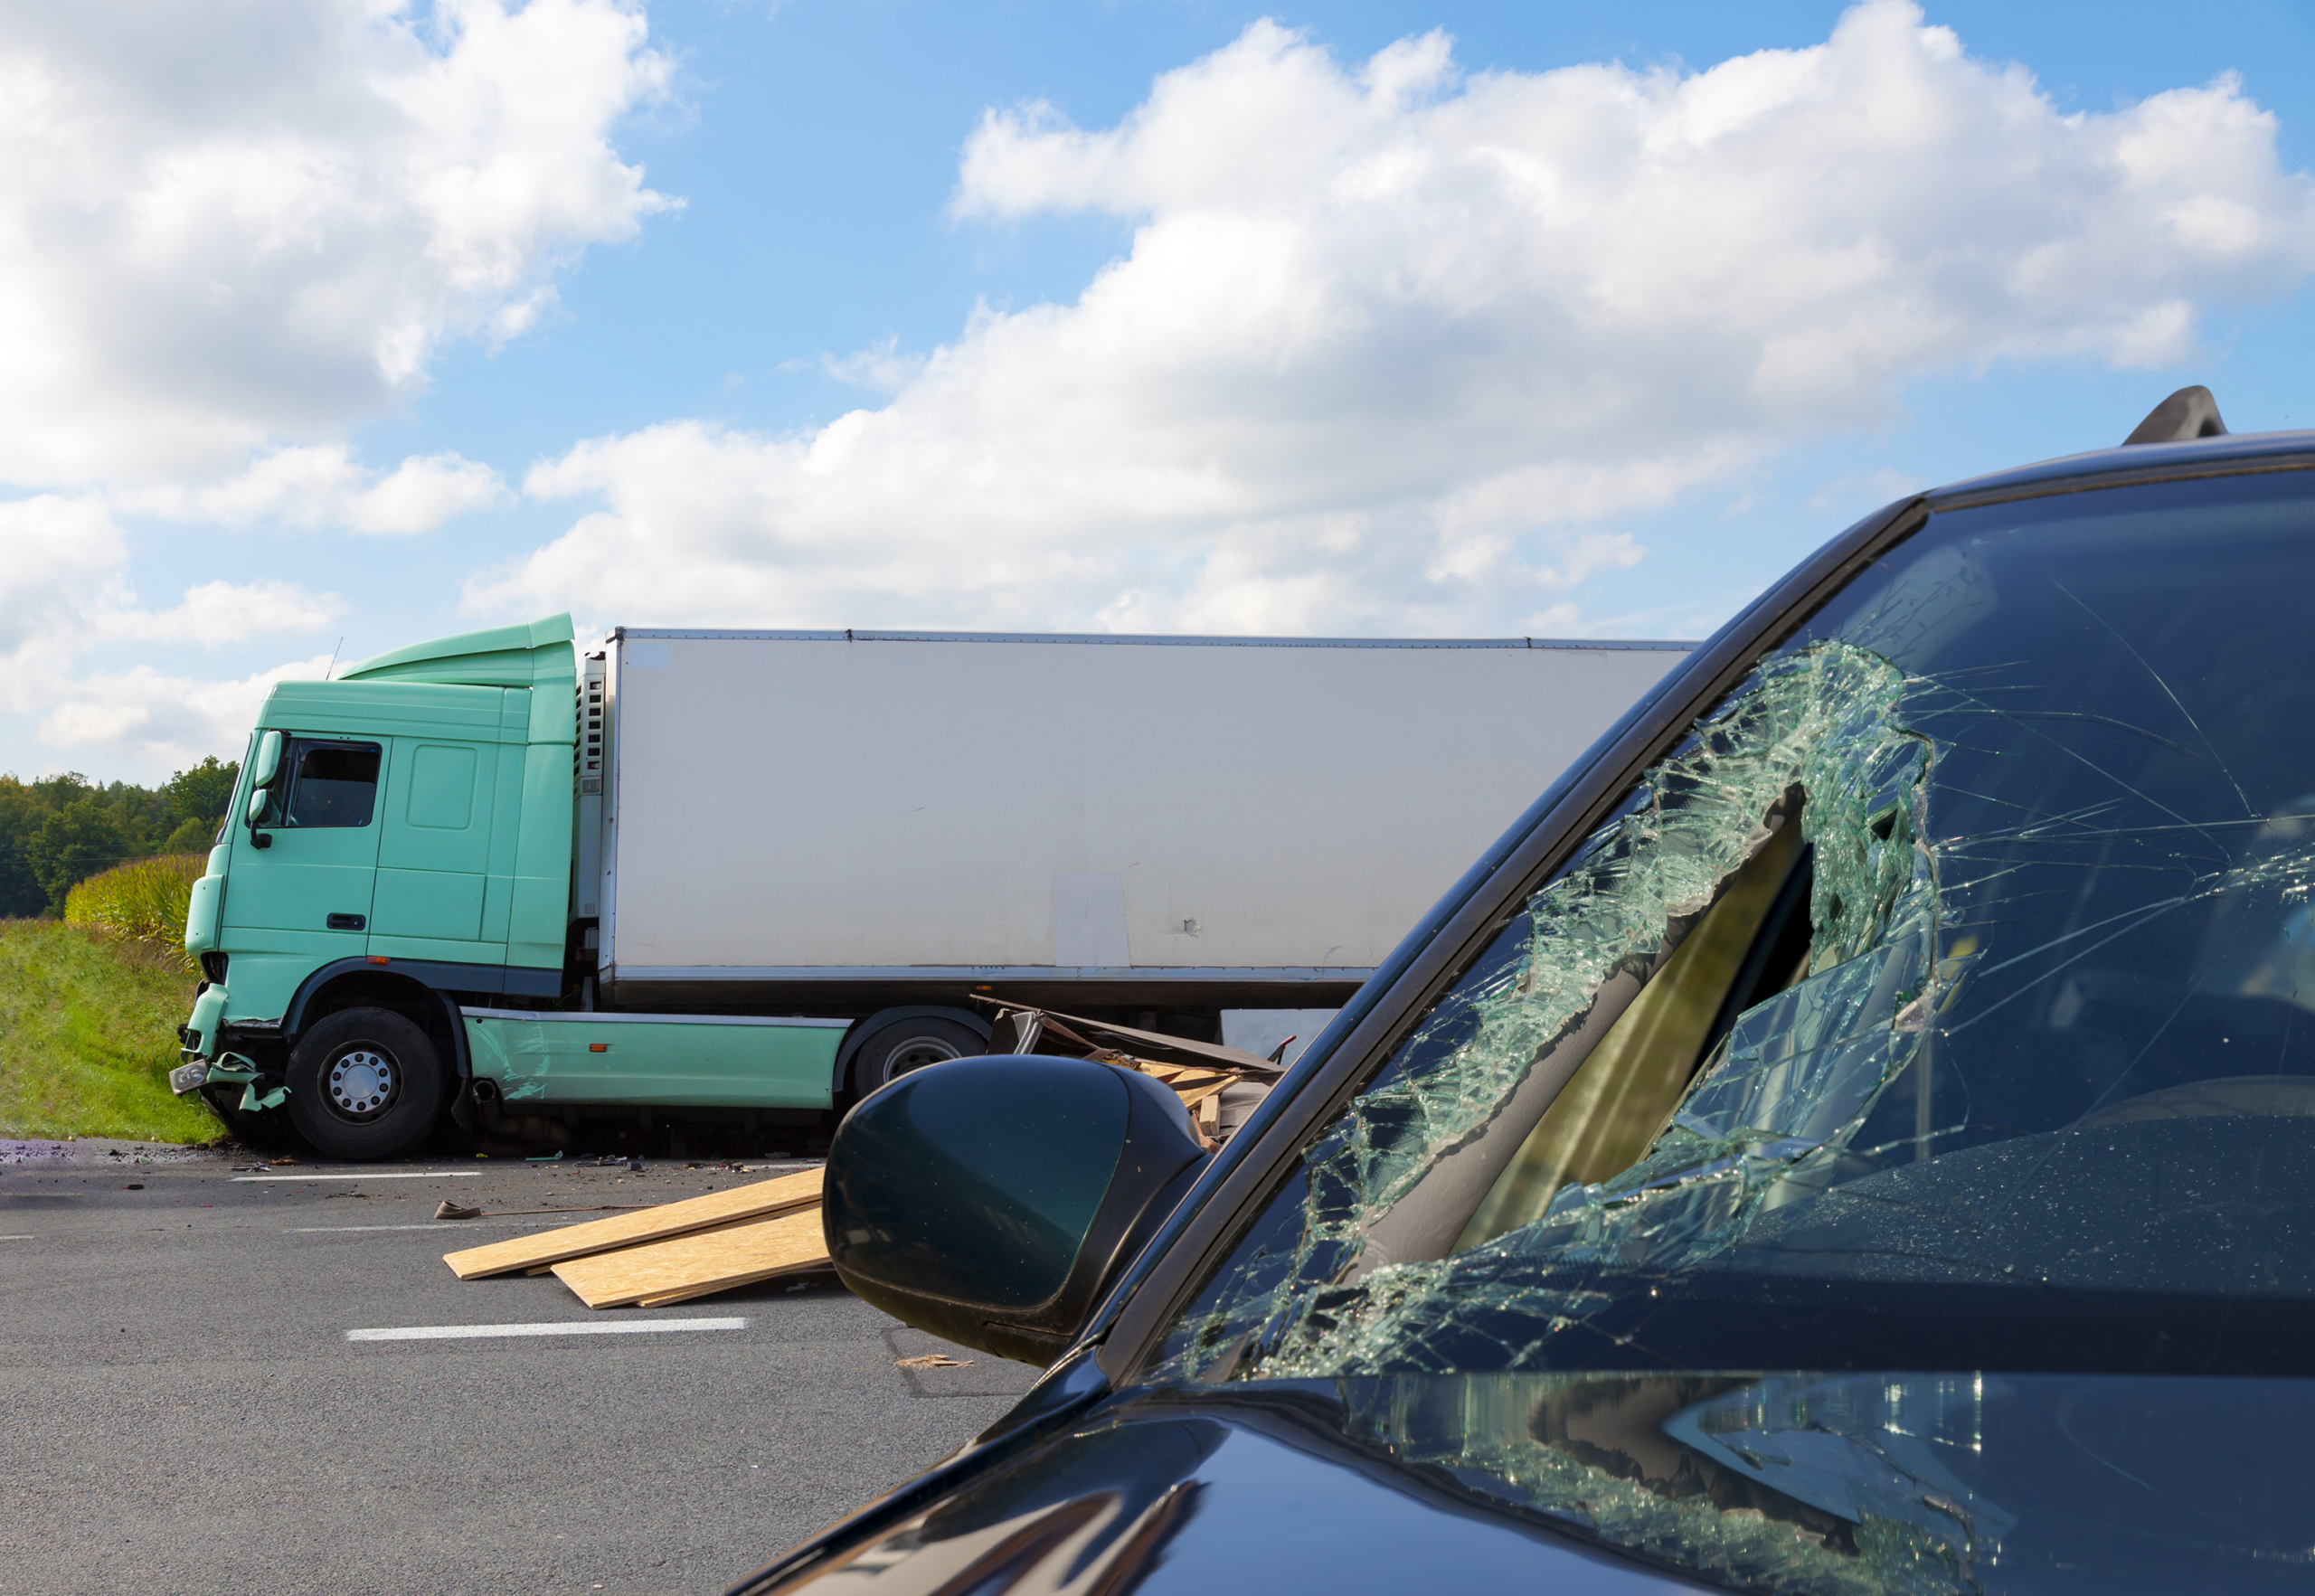 What causes truck accidents?